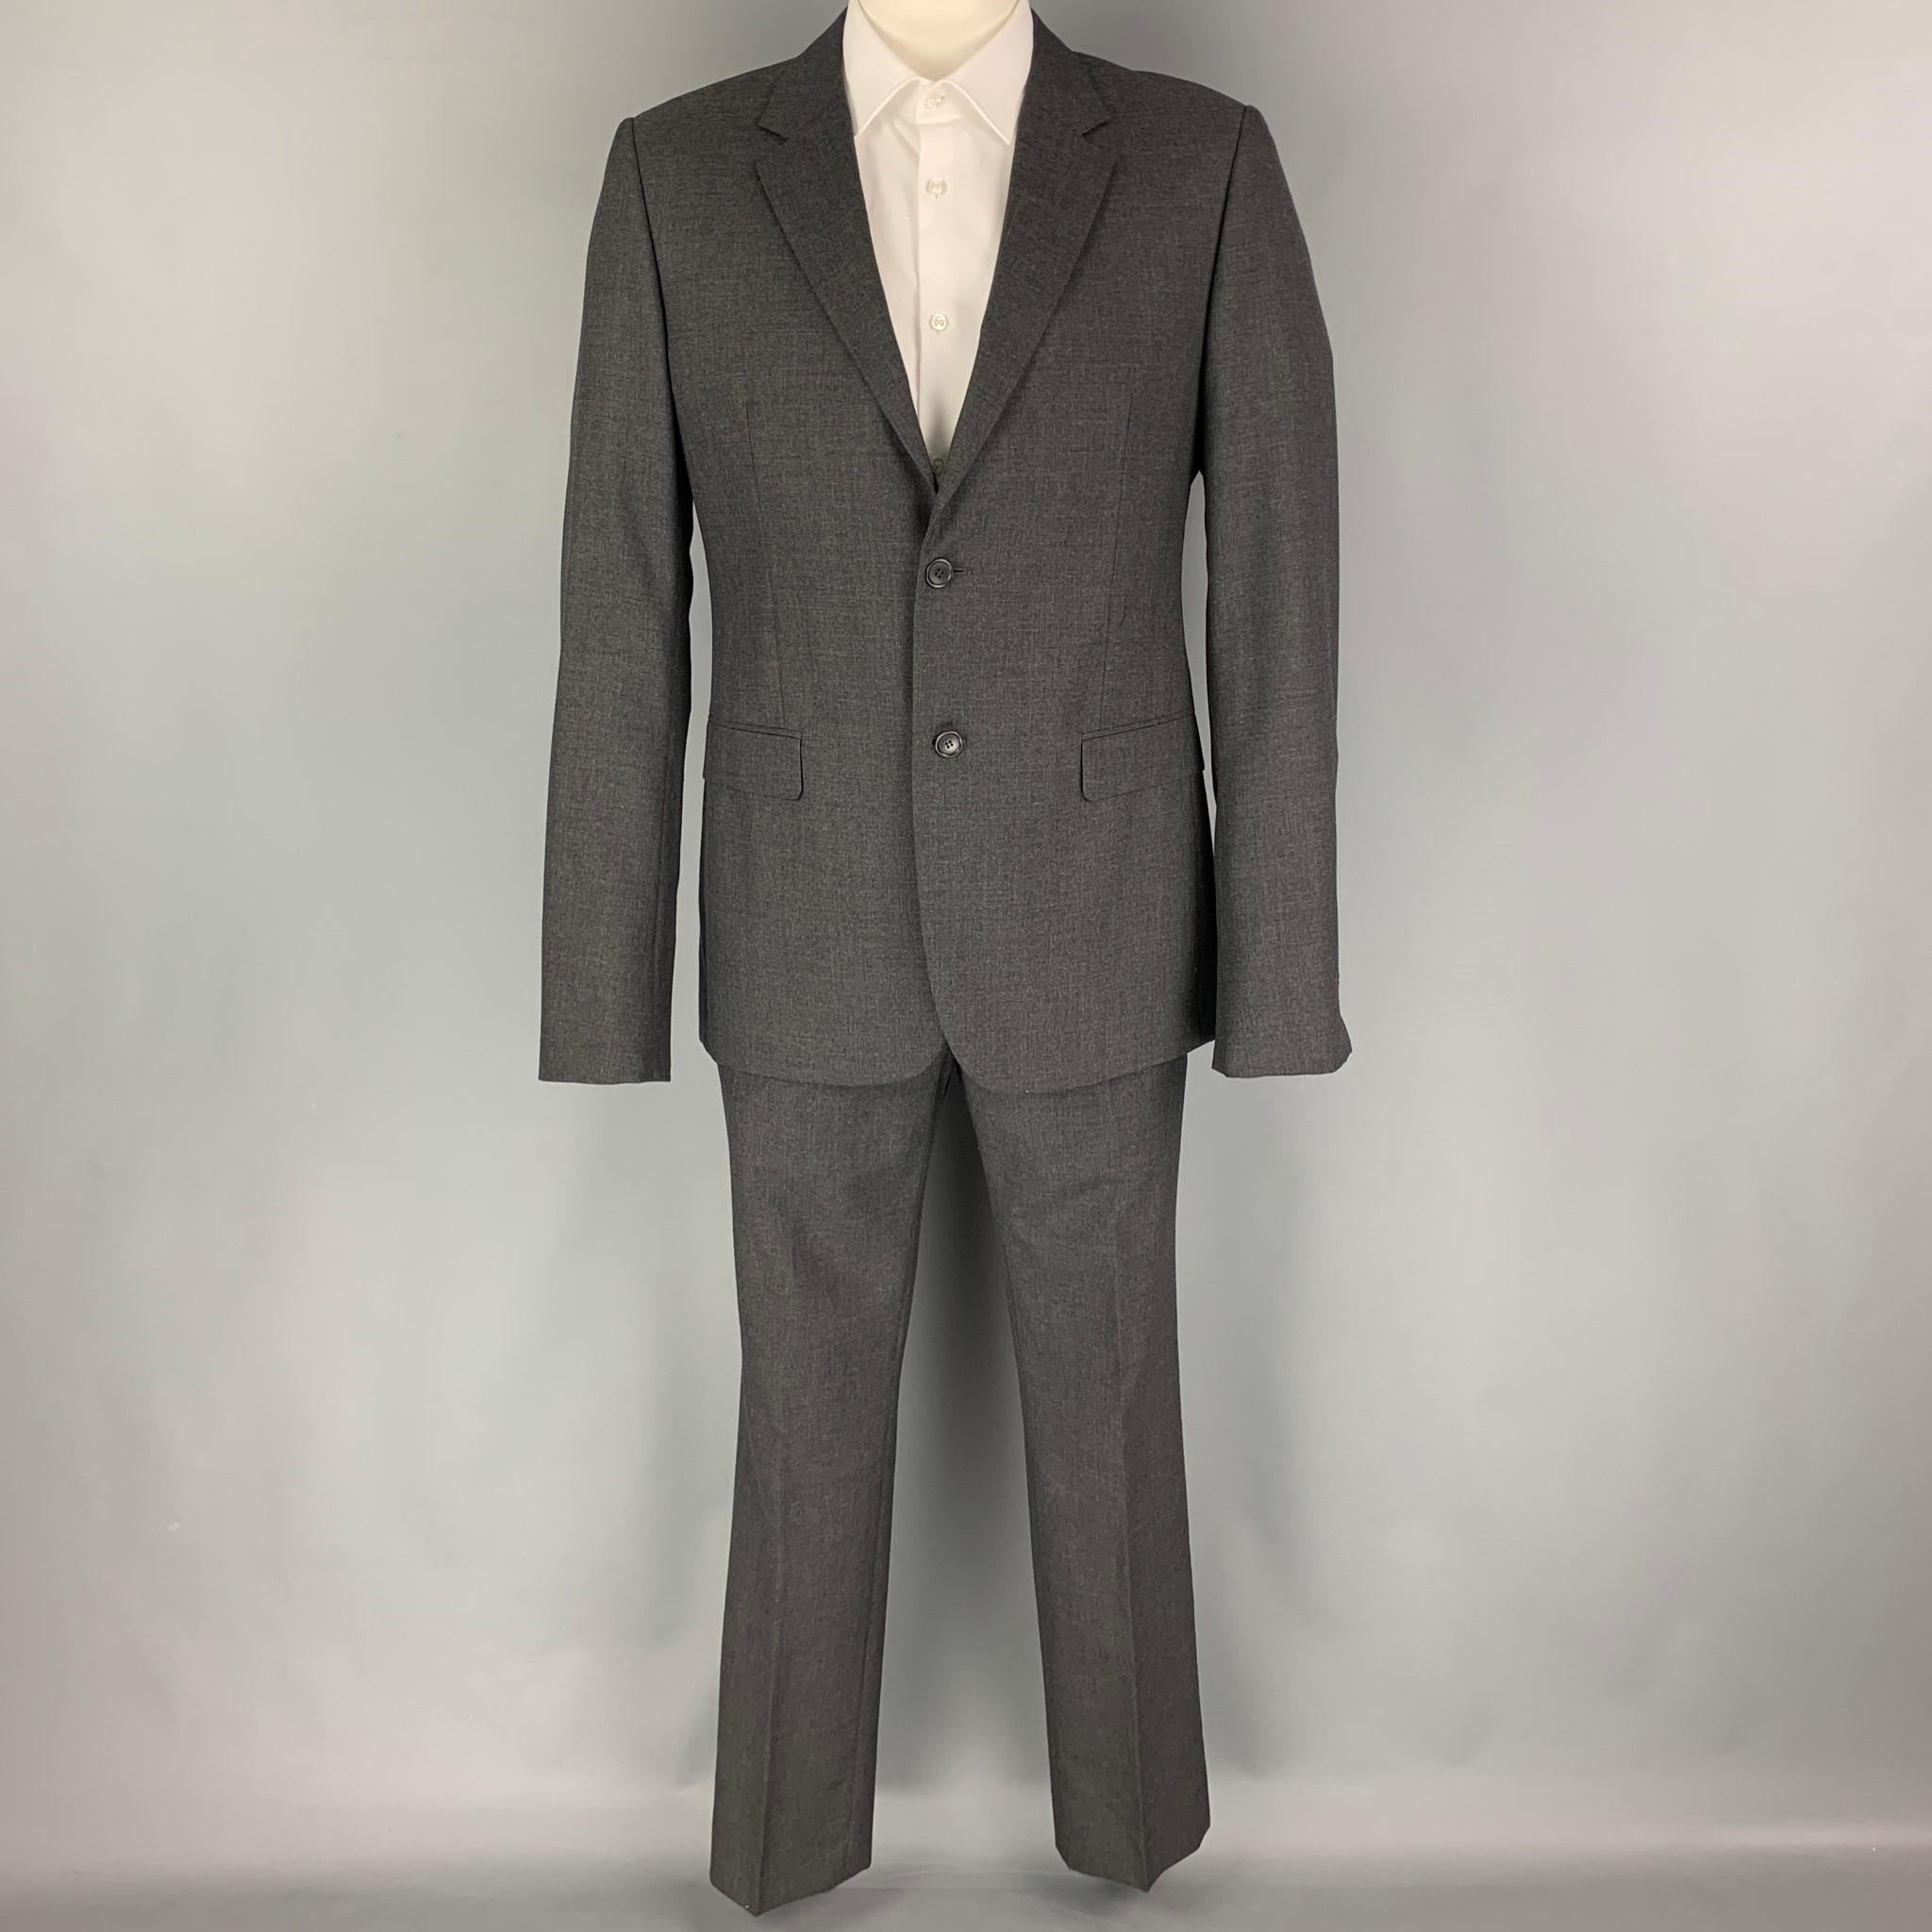 CALVIN KLEIN COLLECTION suit comes in a charcoal wool with a full liner and includes a single breasted,  double button sport coat with a notch lapel and matching flat front trousers.

Excellent Pre-Owned Condition.
Marked: